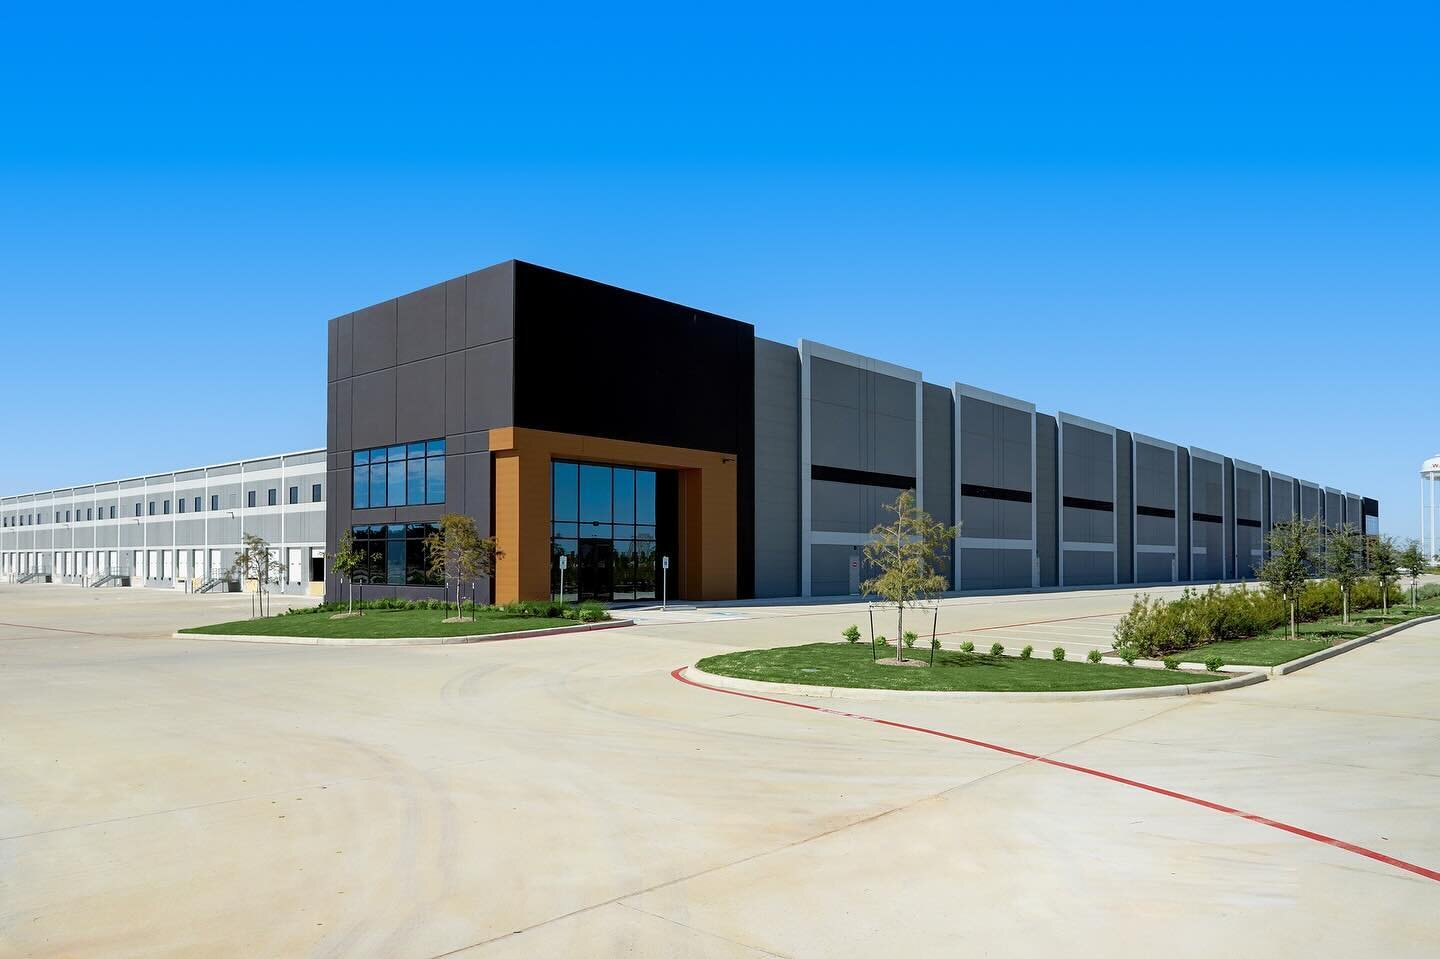 Announcing &ldquo;our first round-trip investment&rdquo; with the sale of The Great 290 Distribution Center to Sealy &amp; Company! With major highway visibility and access, fully leased to leading tenant Daikin Comfort and continuing the footprint o